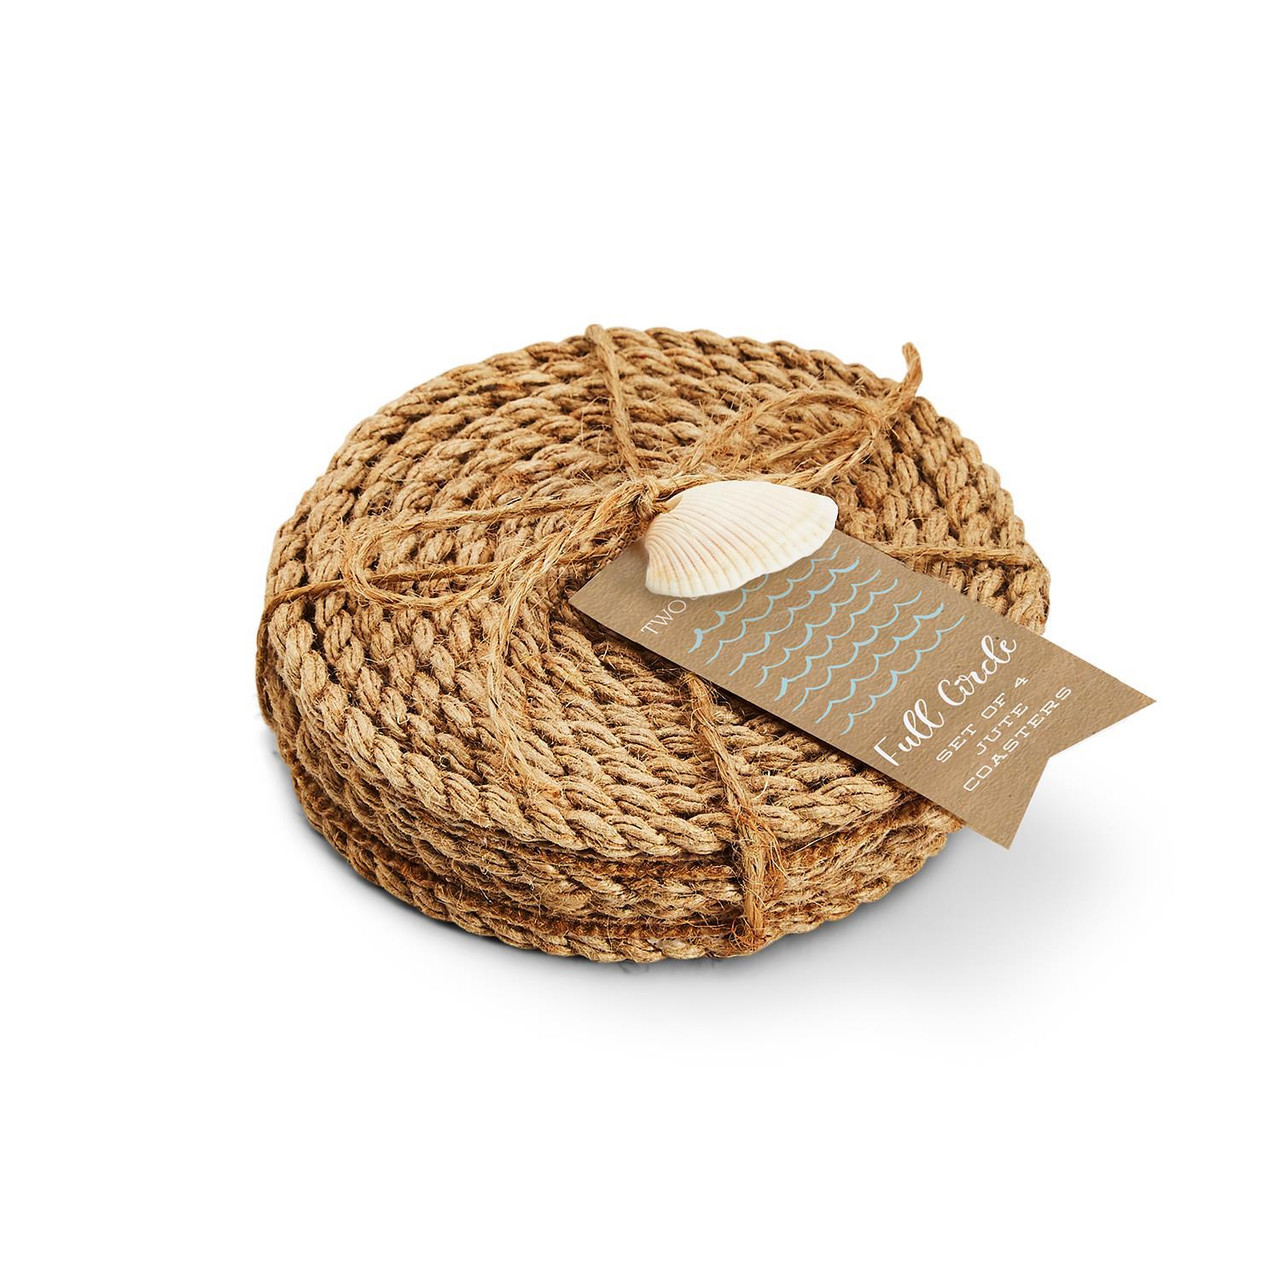 Image of Two's Company Full Circle Jute Coasters 